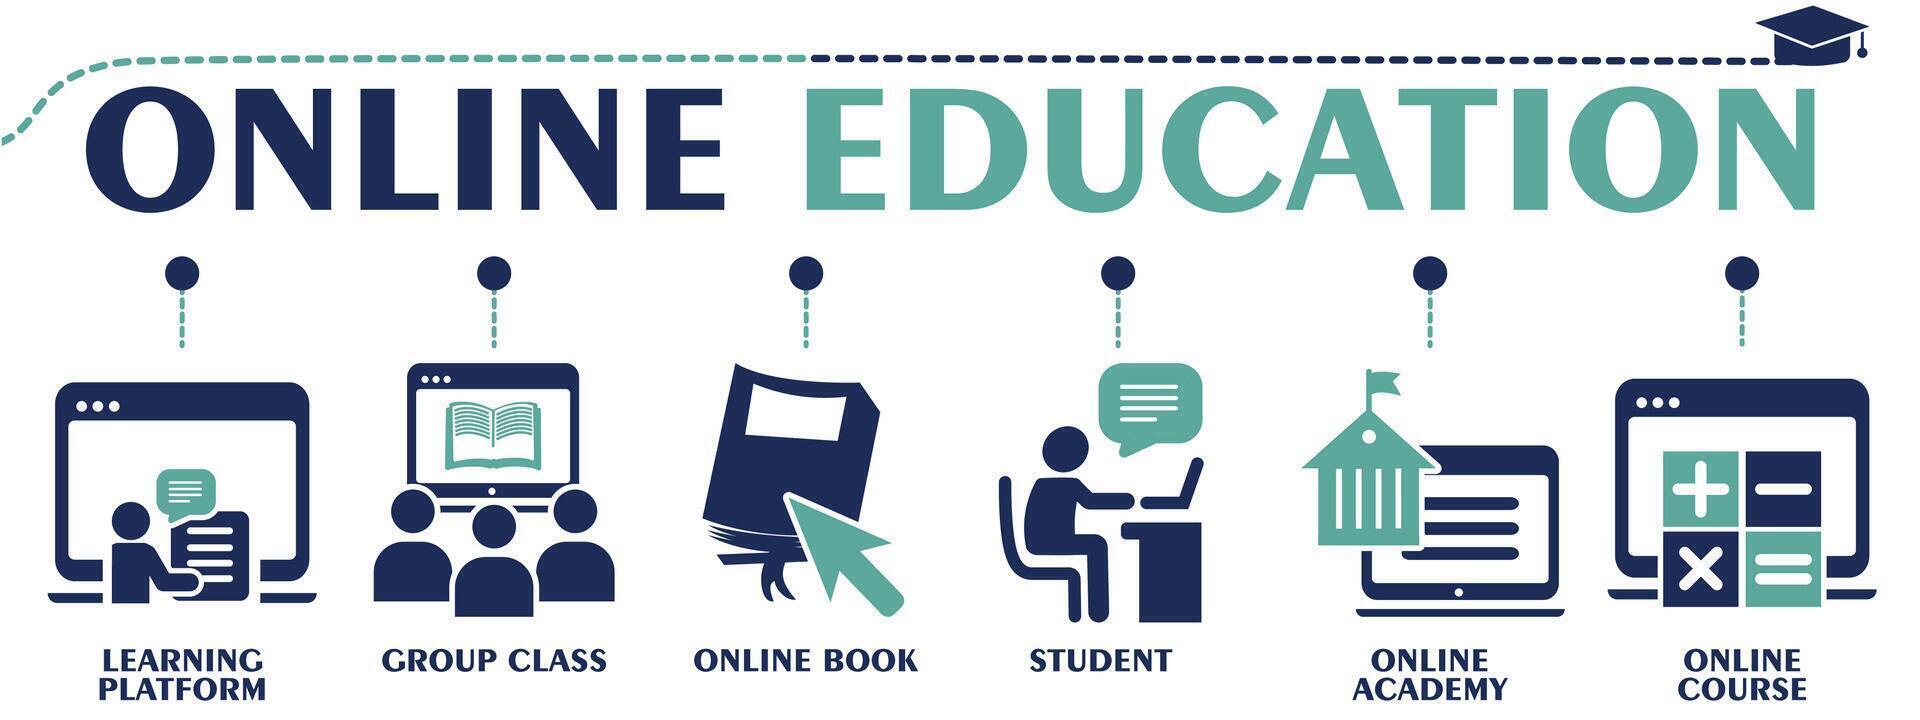 Online education banner web solid icons. Vector illustration concept with an icon of learning platform, group class, online book, academy, student and course.